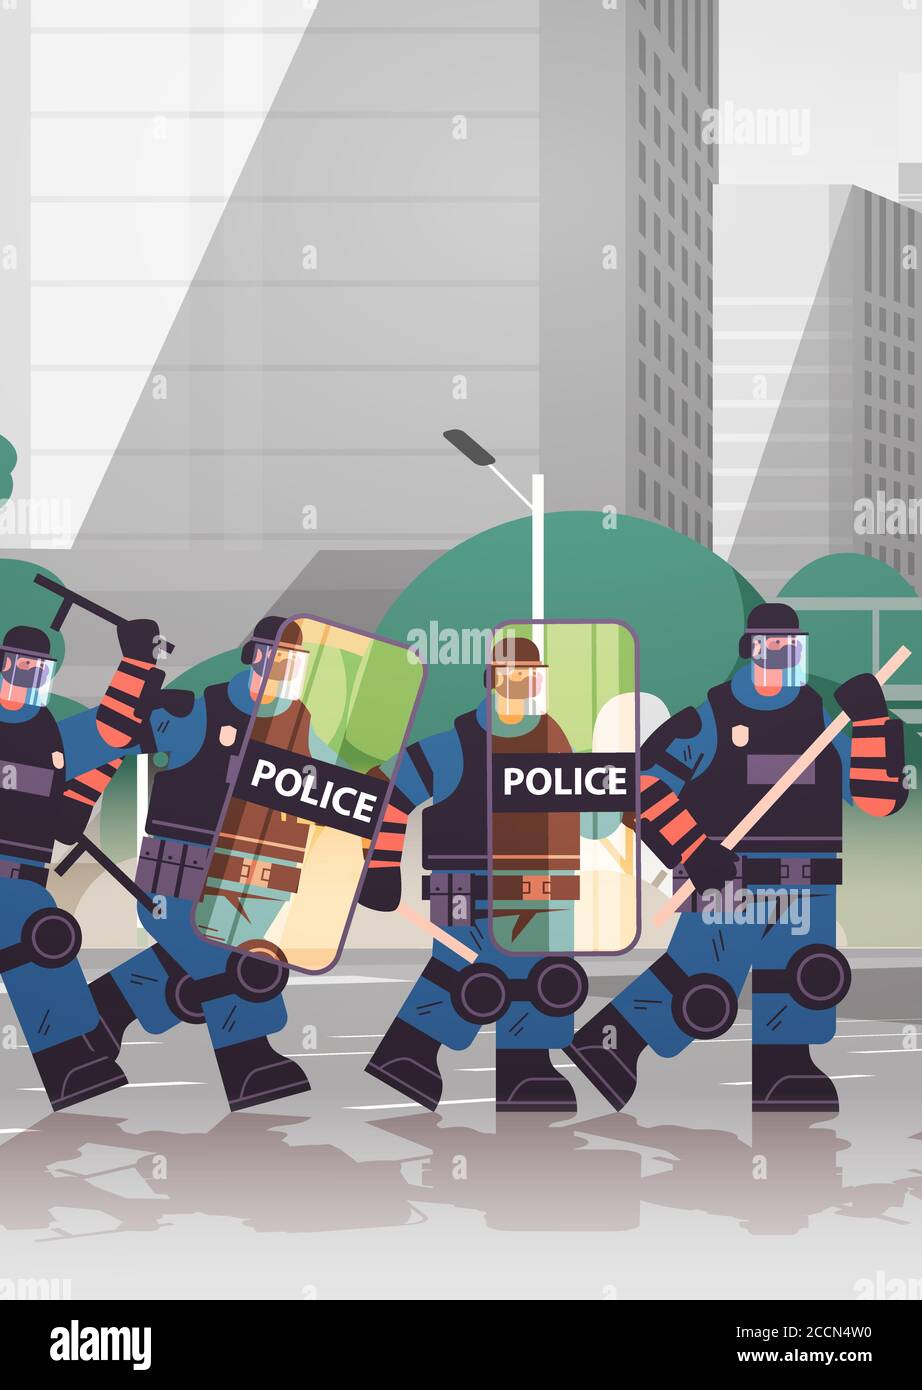 policemen with shields and batons riot police officers standing together protesters demonstrations control concept cityscape full length vertical vector illustration Stock Vector